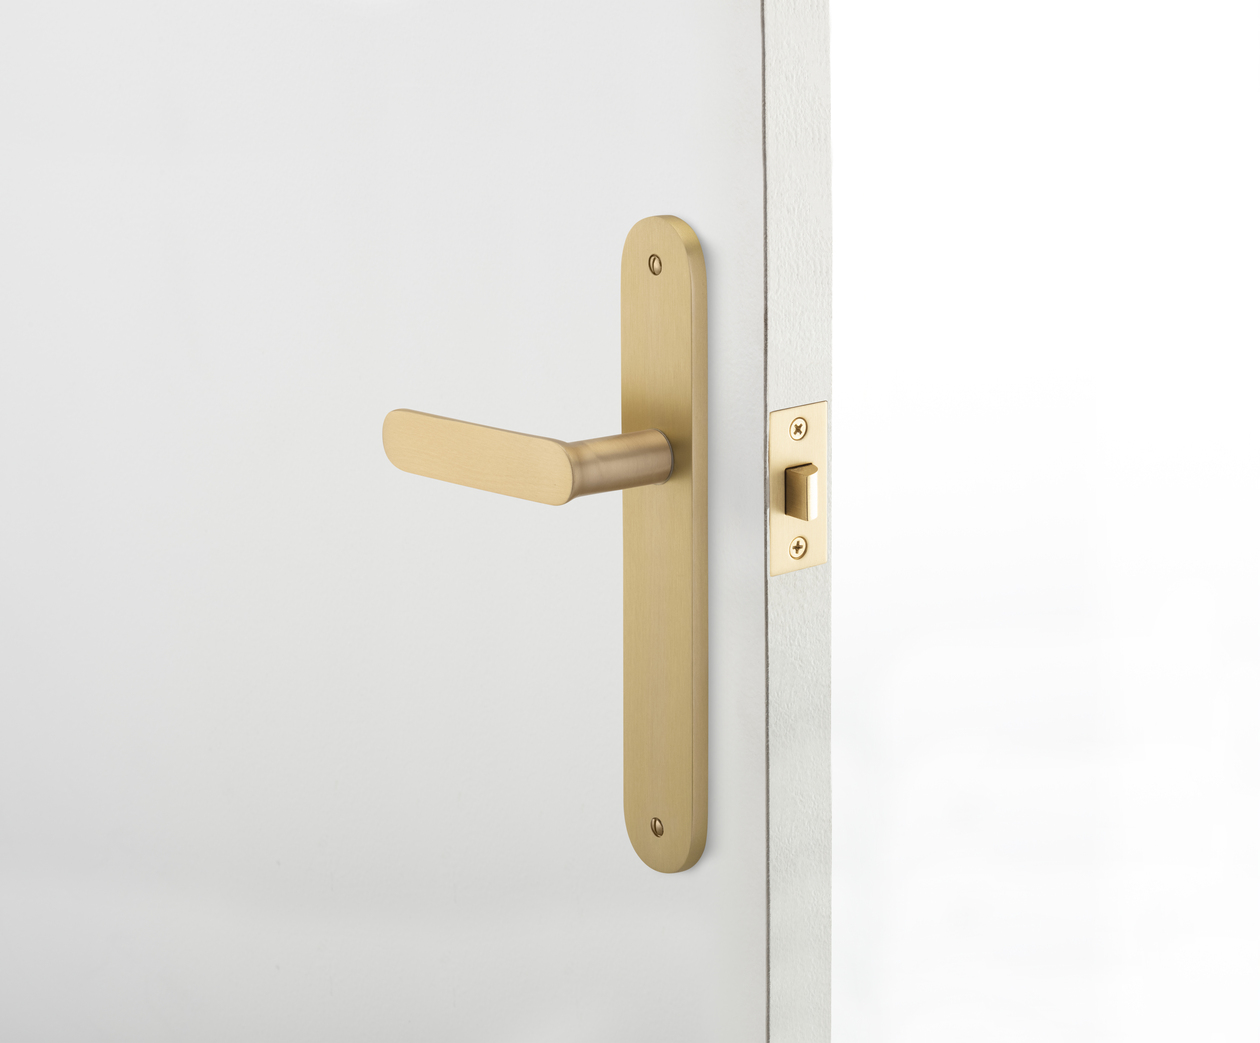 14764 - Bronte Lever - Oval Backplate - Satin Nickel - Passage